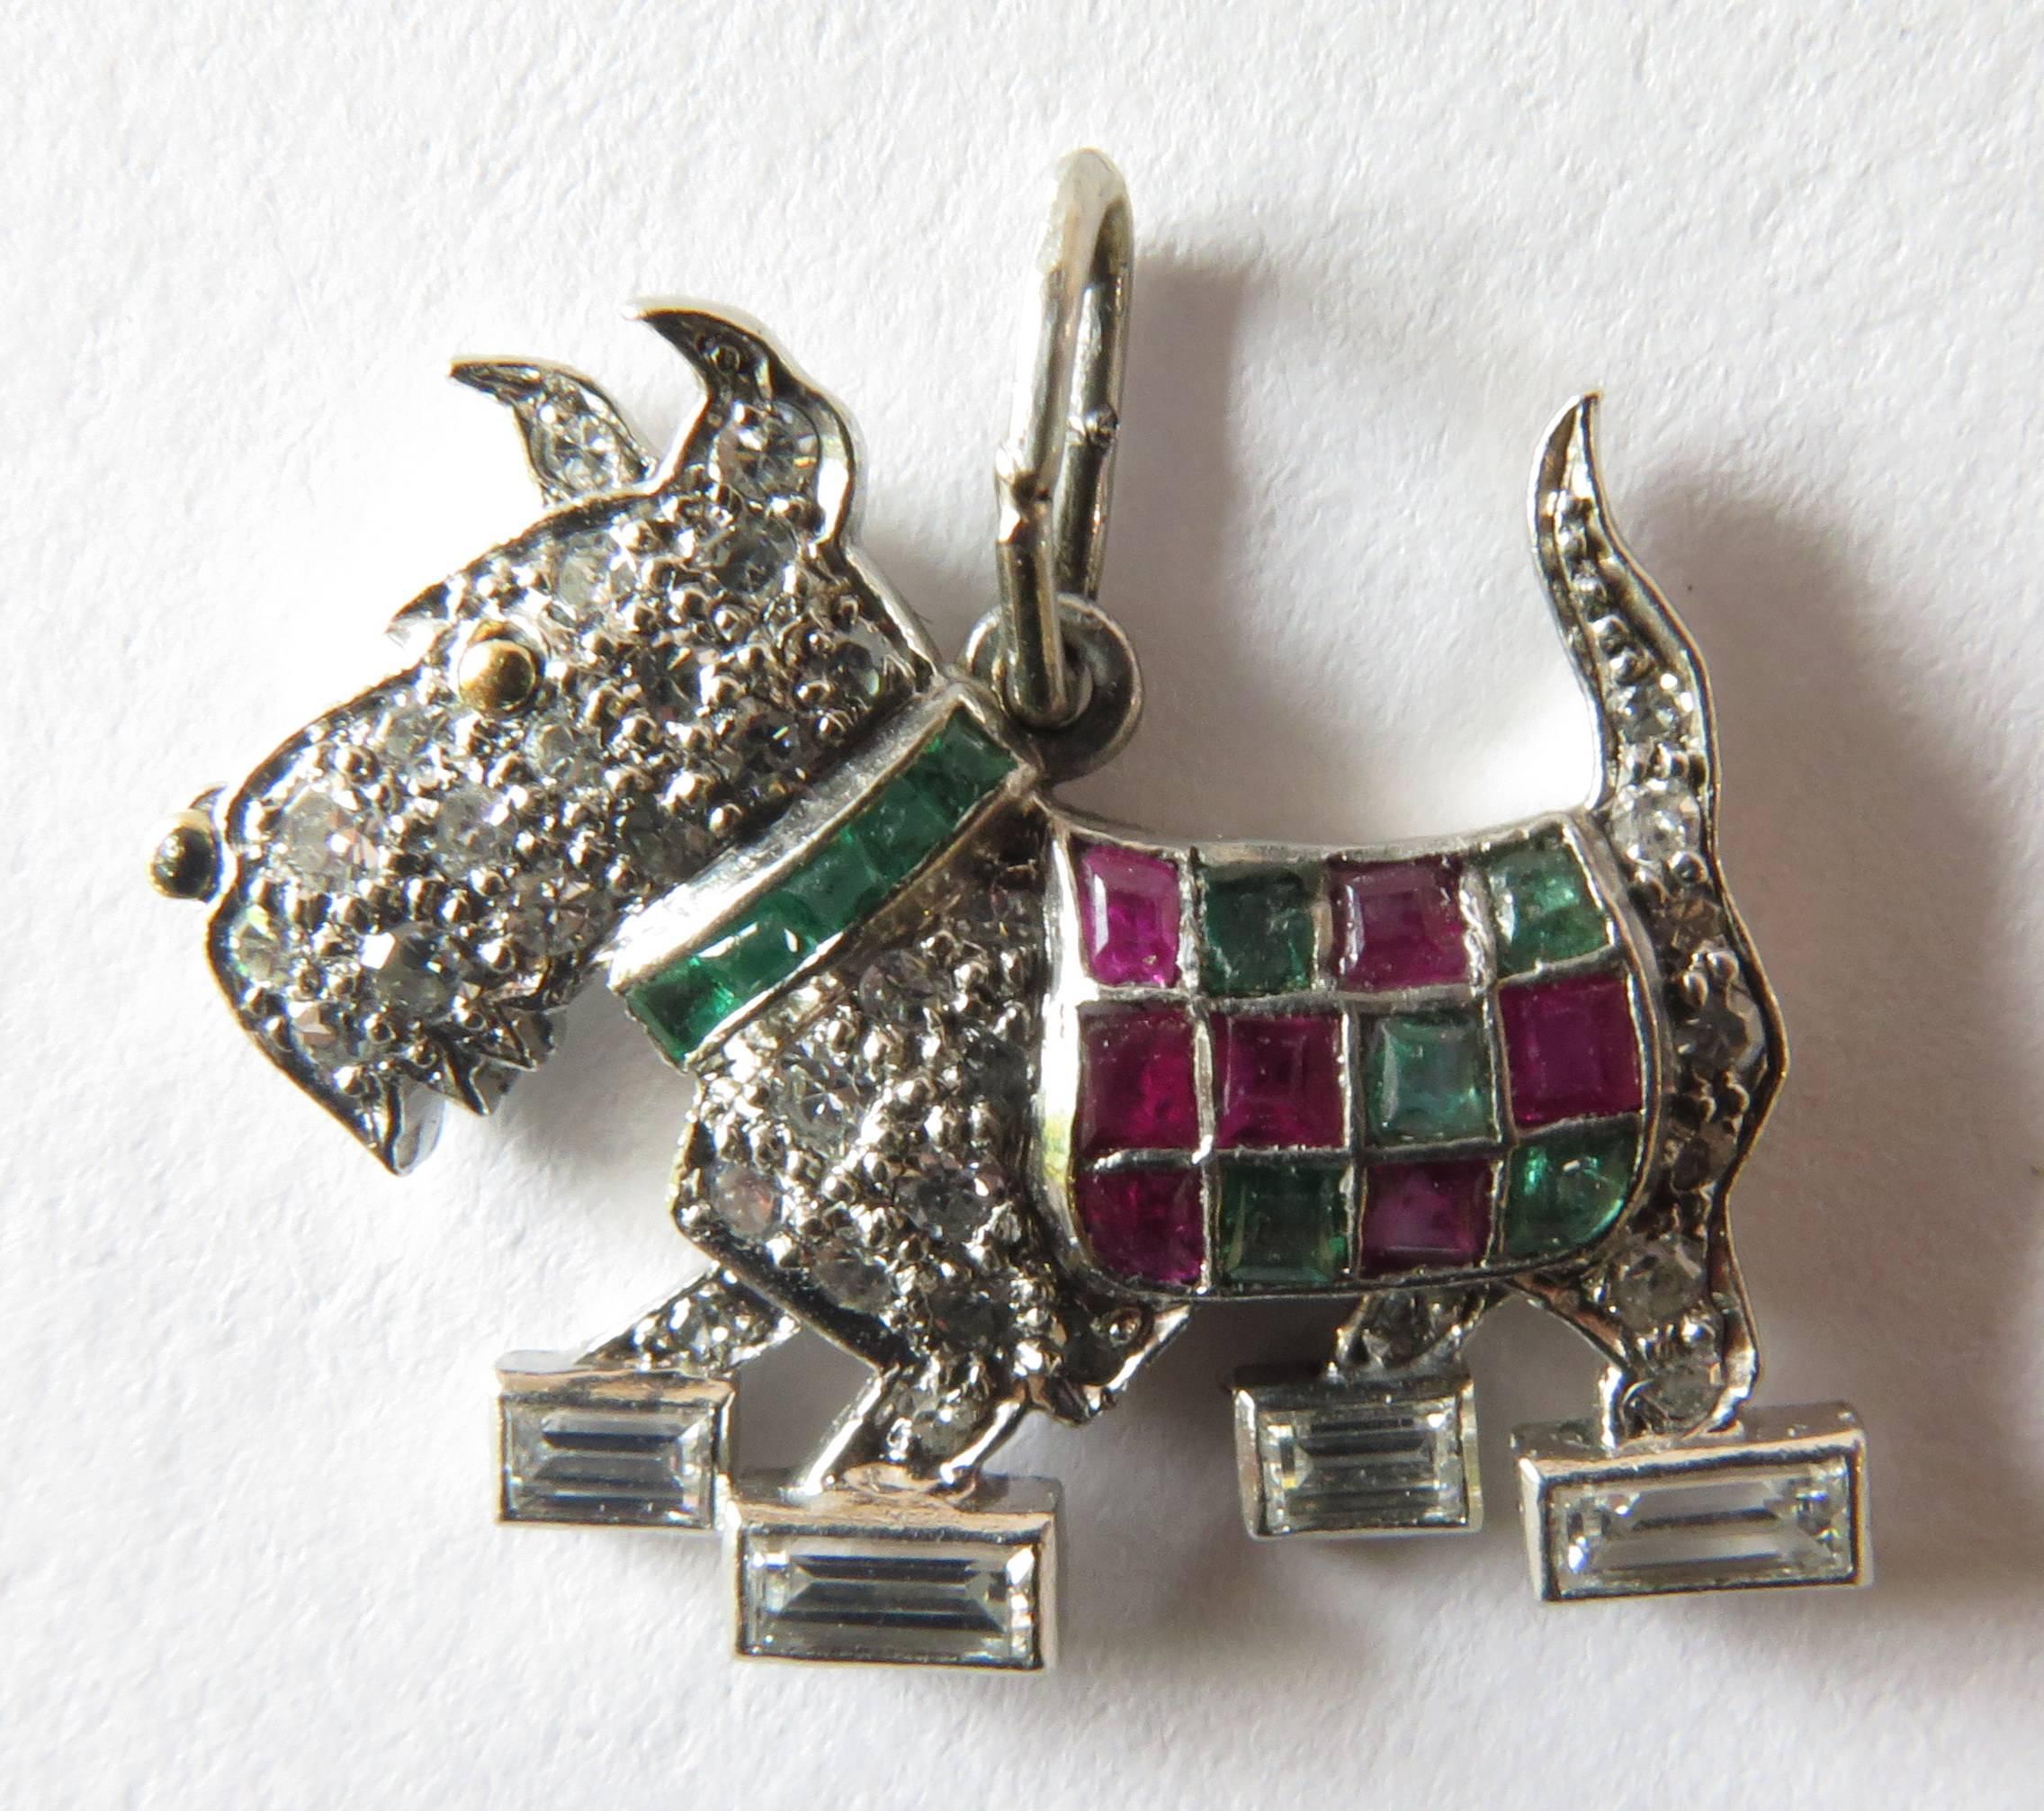 This adorable Scottish Terrier is exceptional in so many ways. His scottish checkerboard coat is made of emeralds and rubies. His collar is all channel set emeralds. His nose is black enamel. His eye is high carat yellow gold drop. And the rest of